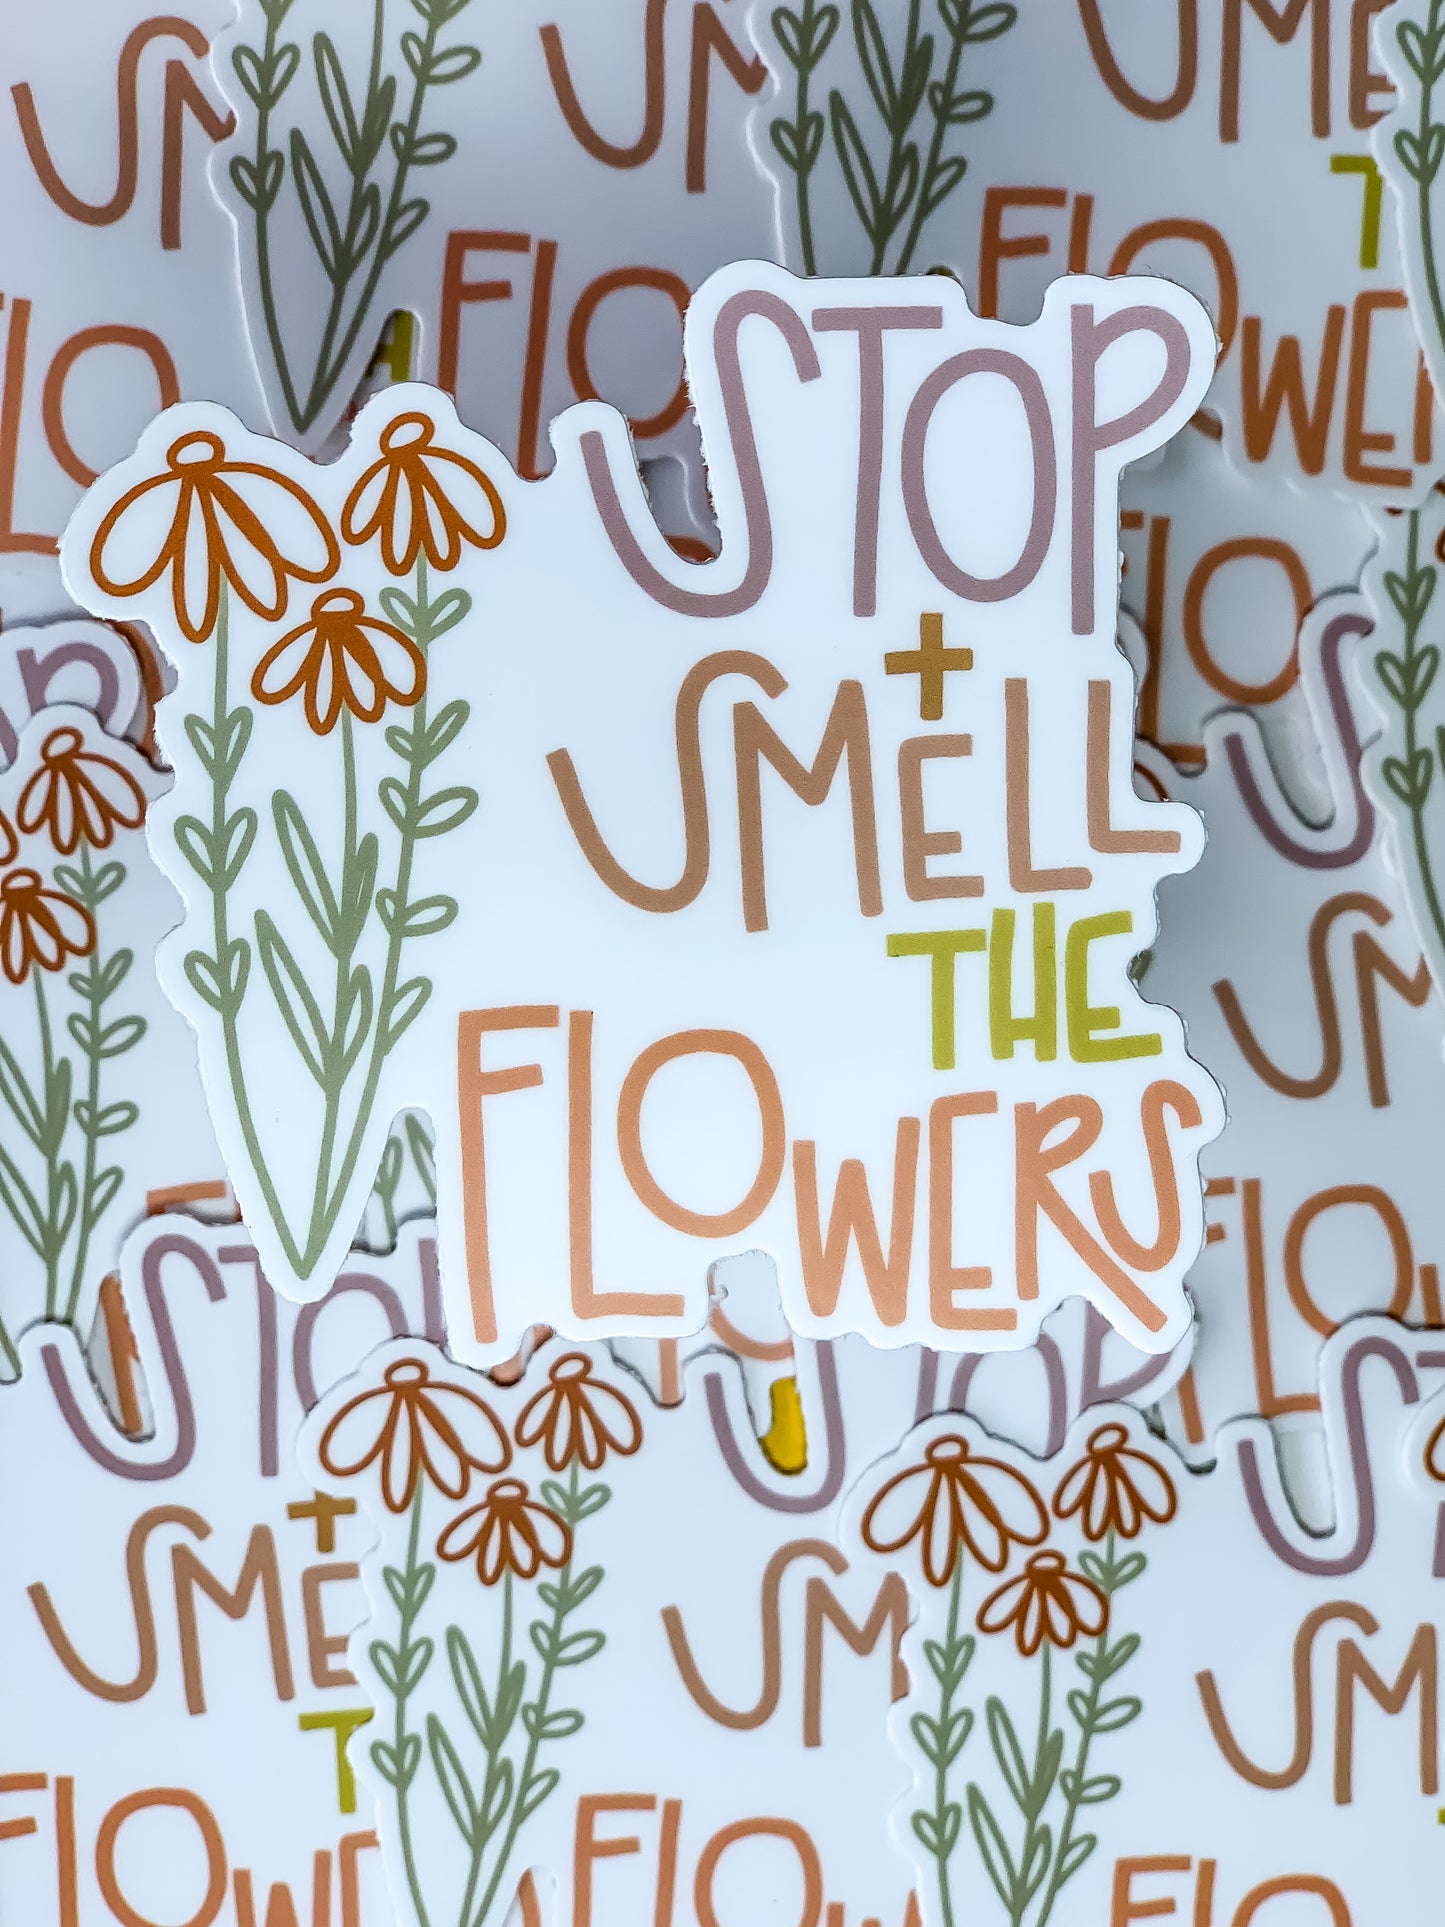 Stop and Smell the Flowers Sticker.